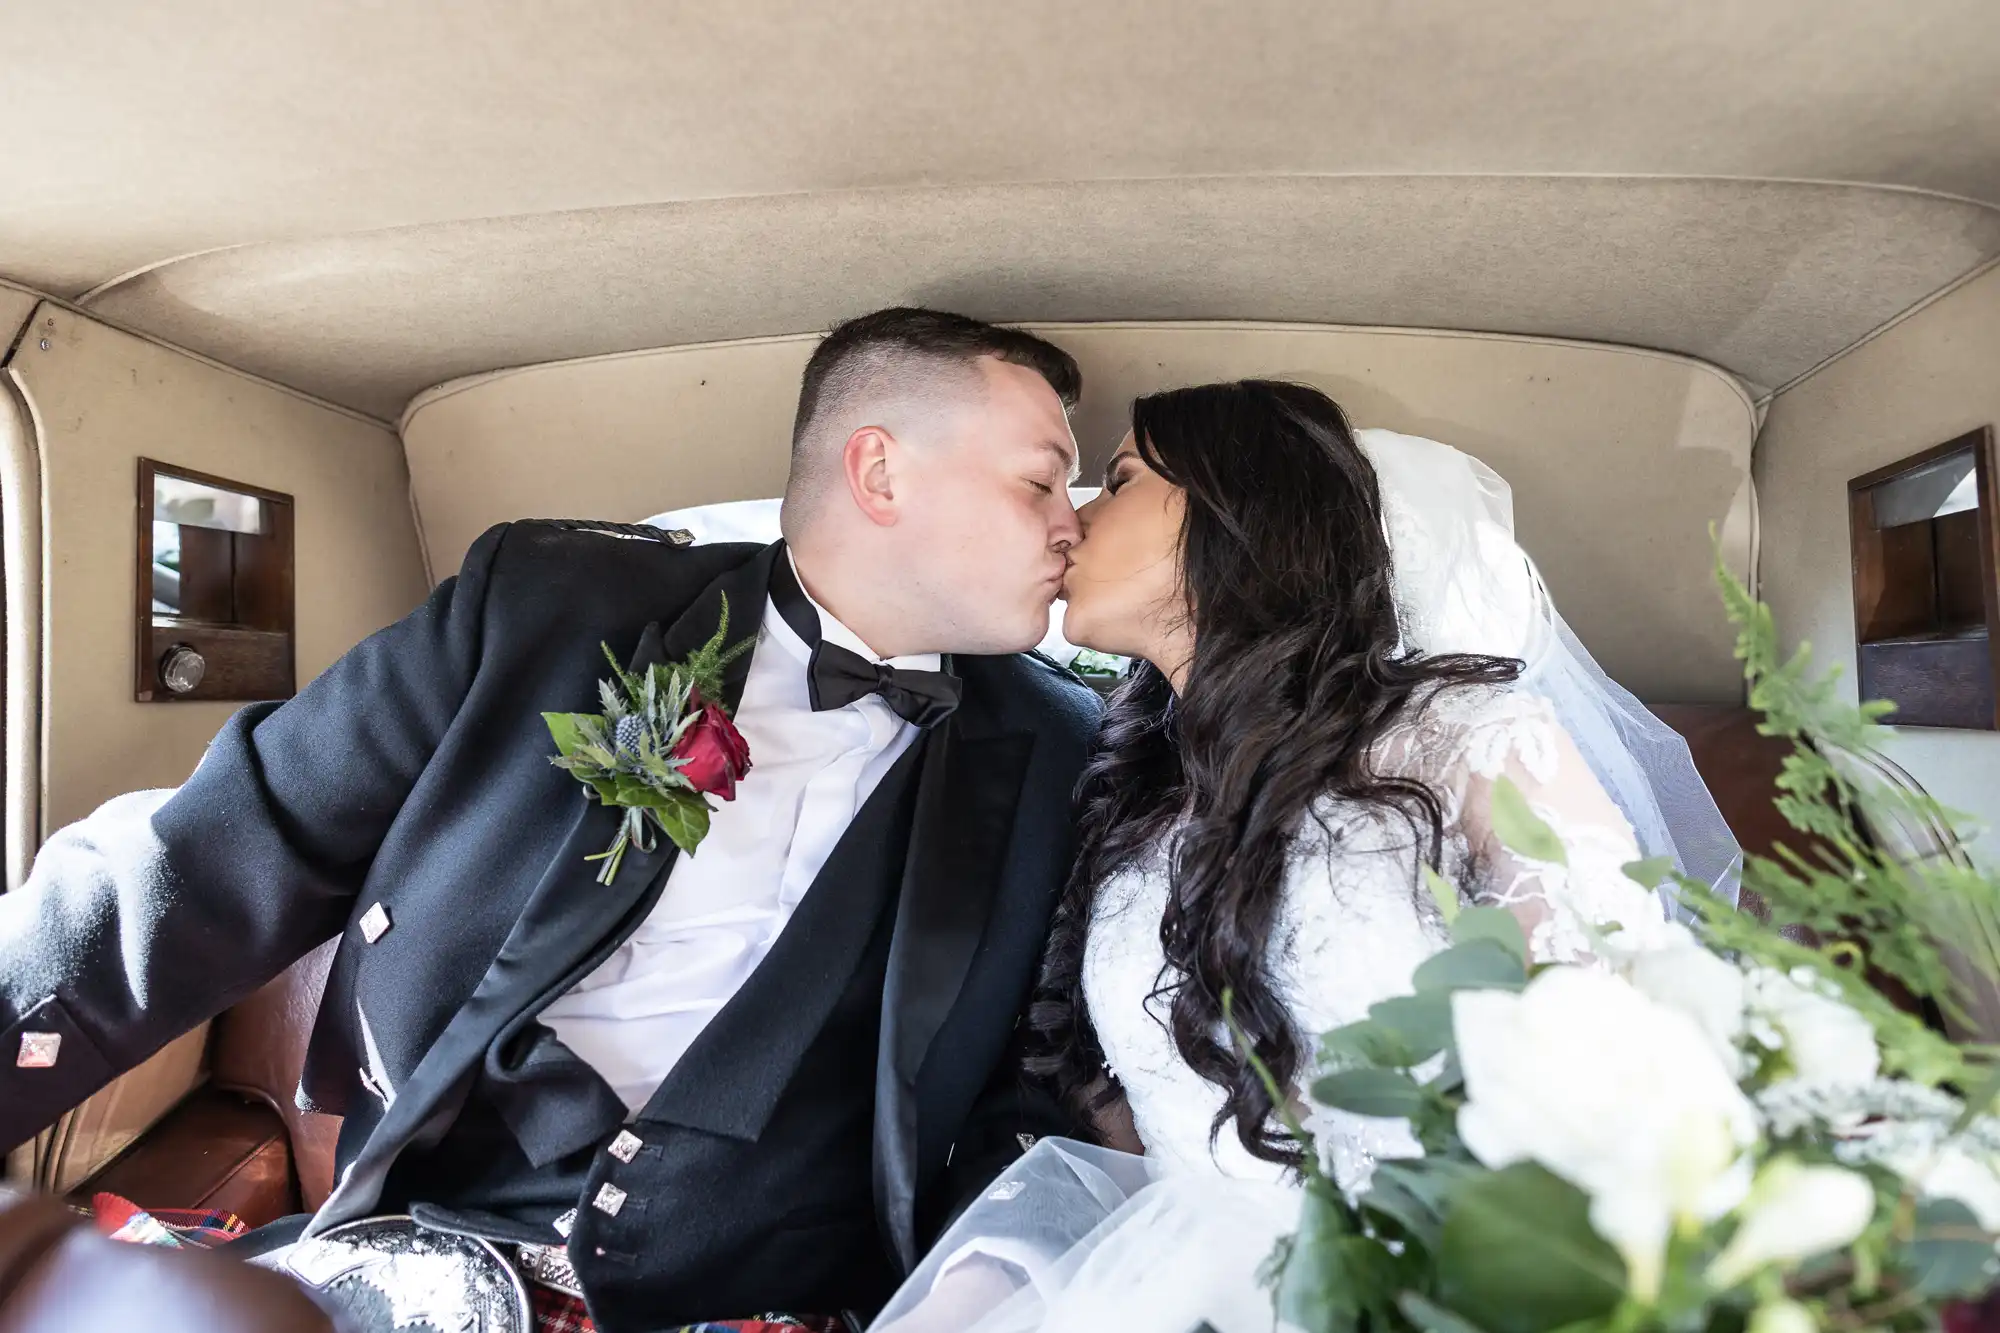 A newlywed couple kissing inside a vintage car, surrounded by white flowers, with the bride in a white dress and the groom in a black tuxedo.